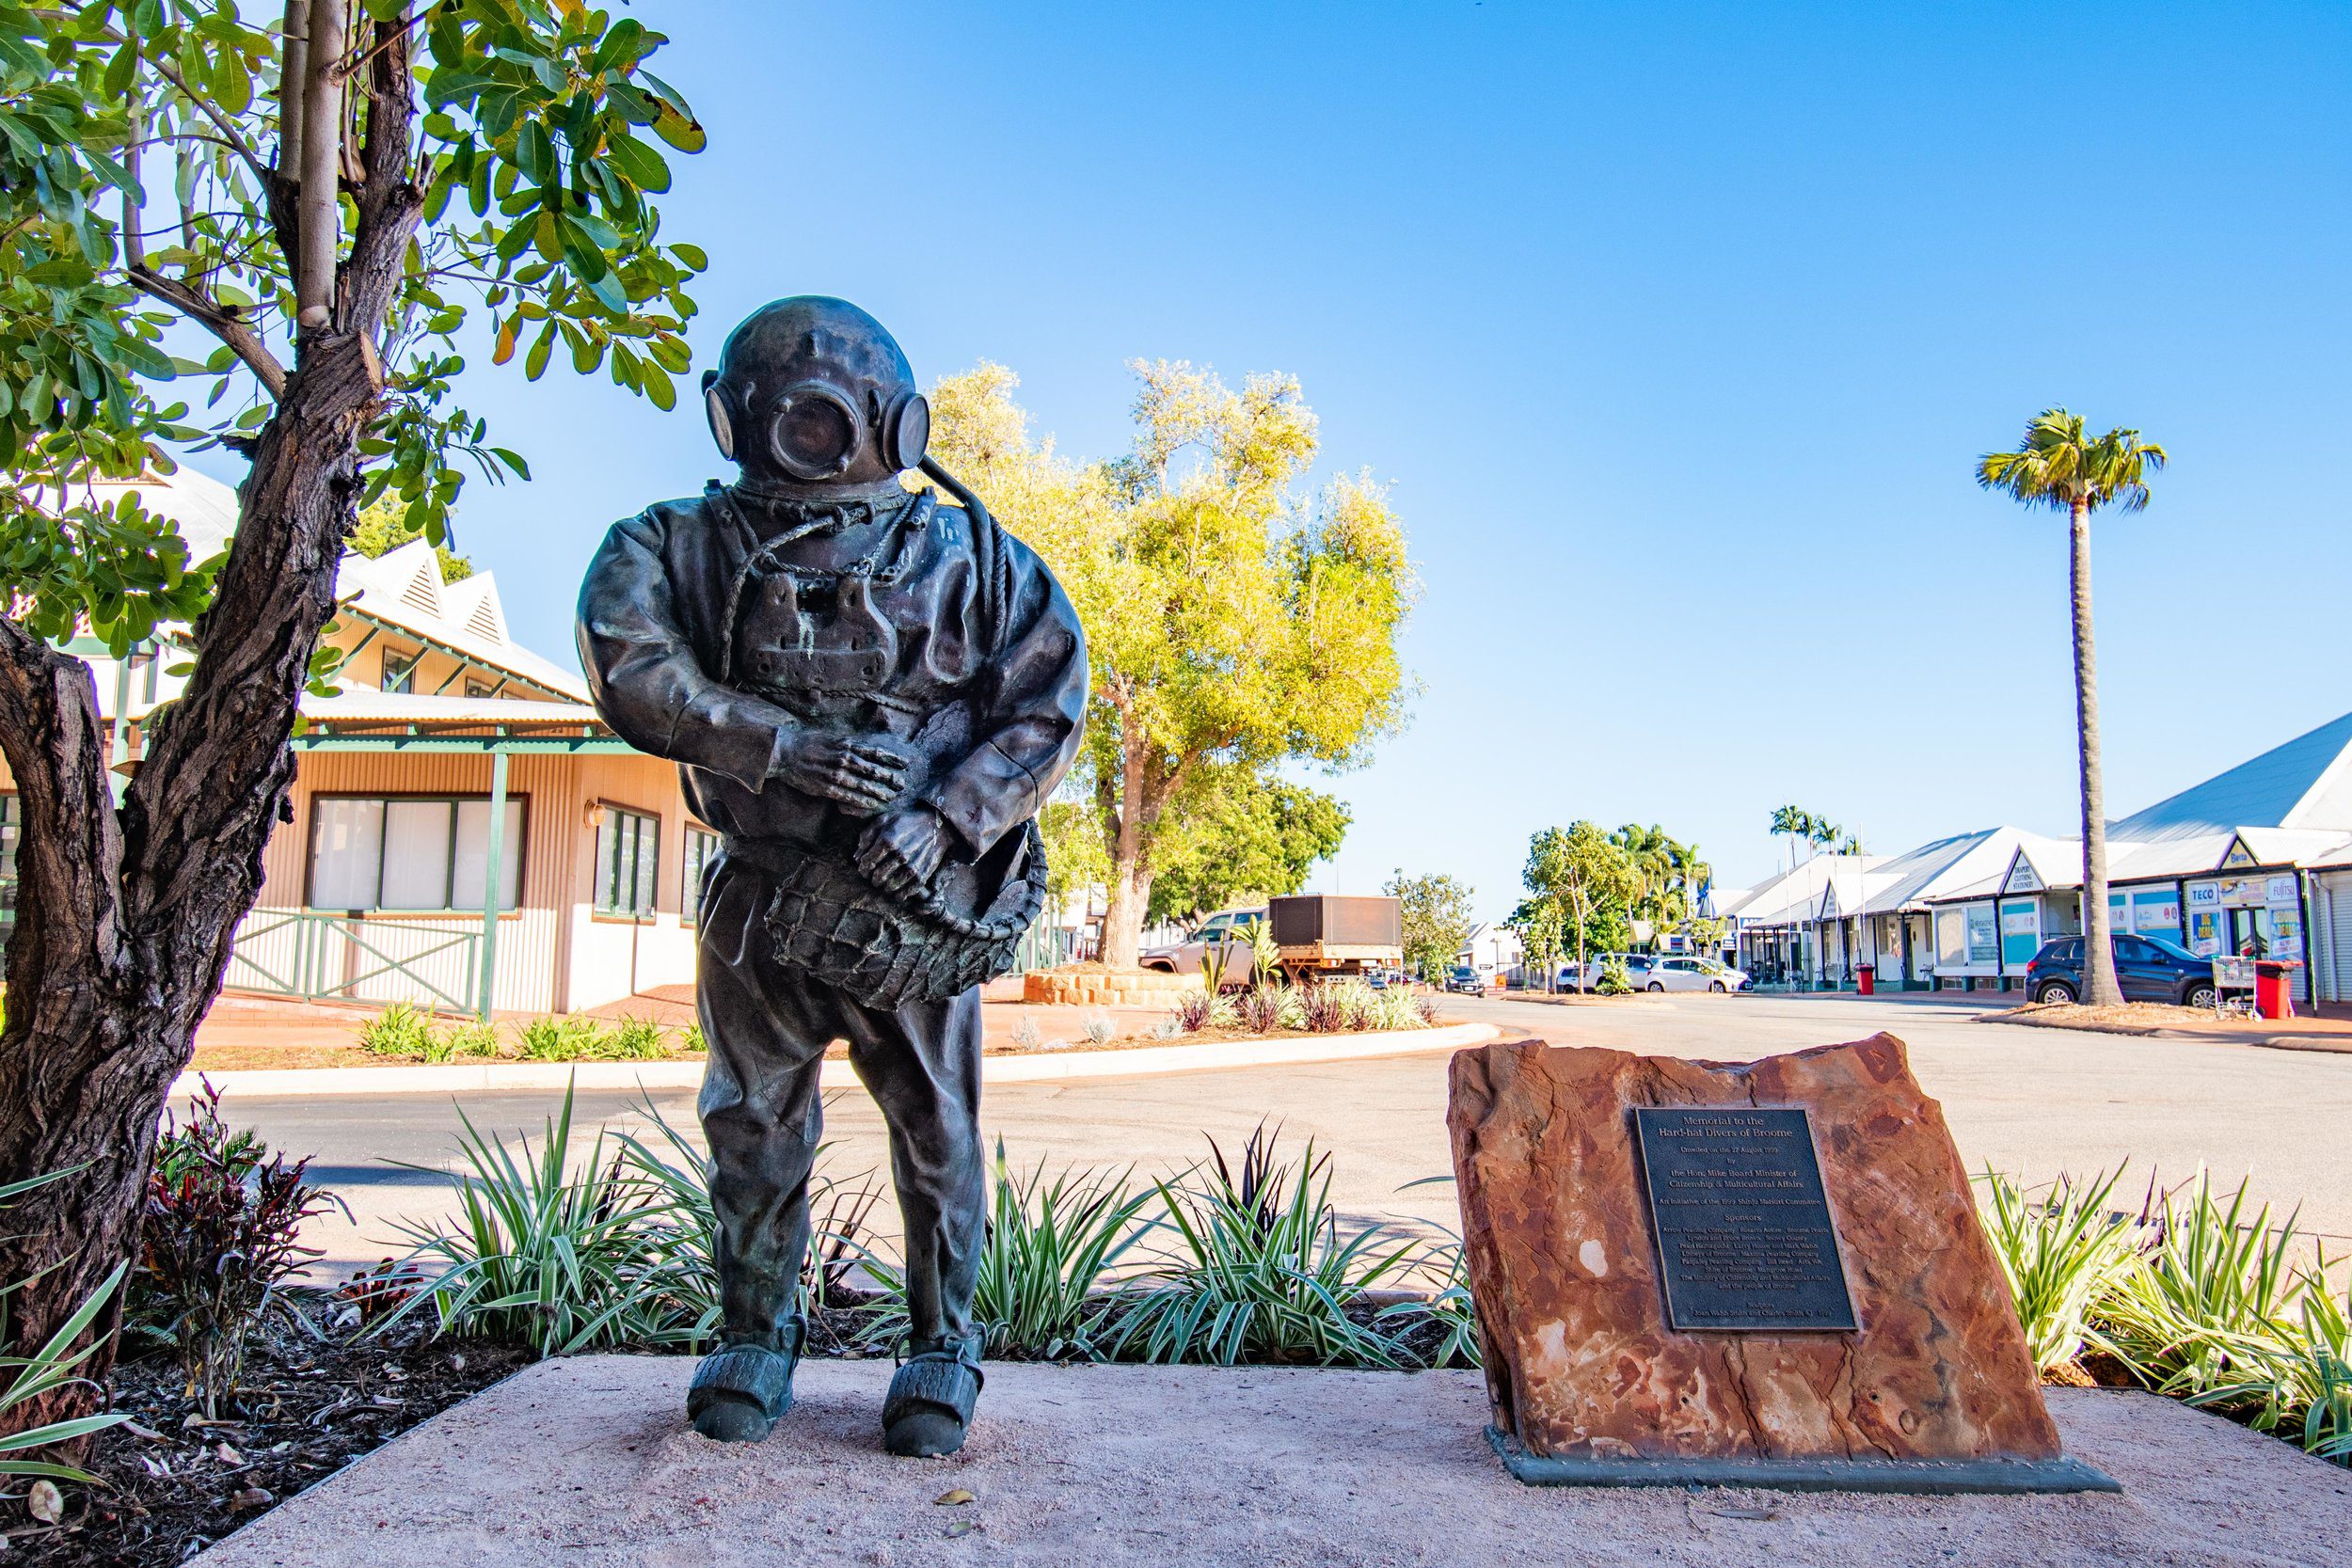 The Hard Hat Diver statue in Broome's town centre, showing a diver wearing a helmet and suit next to a smaller rock with a memorial plaque